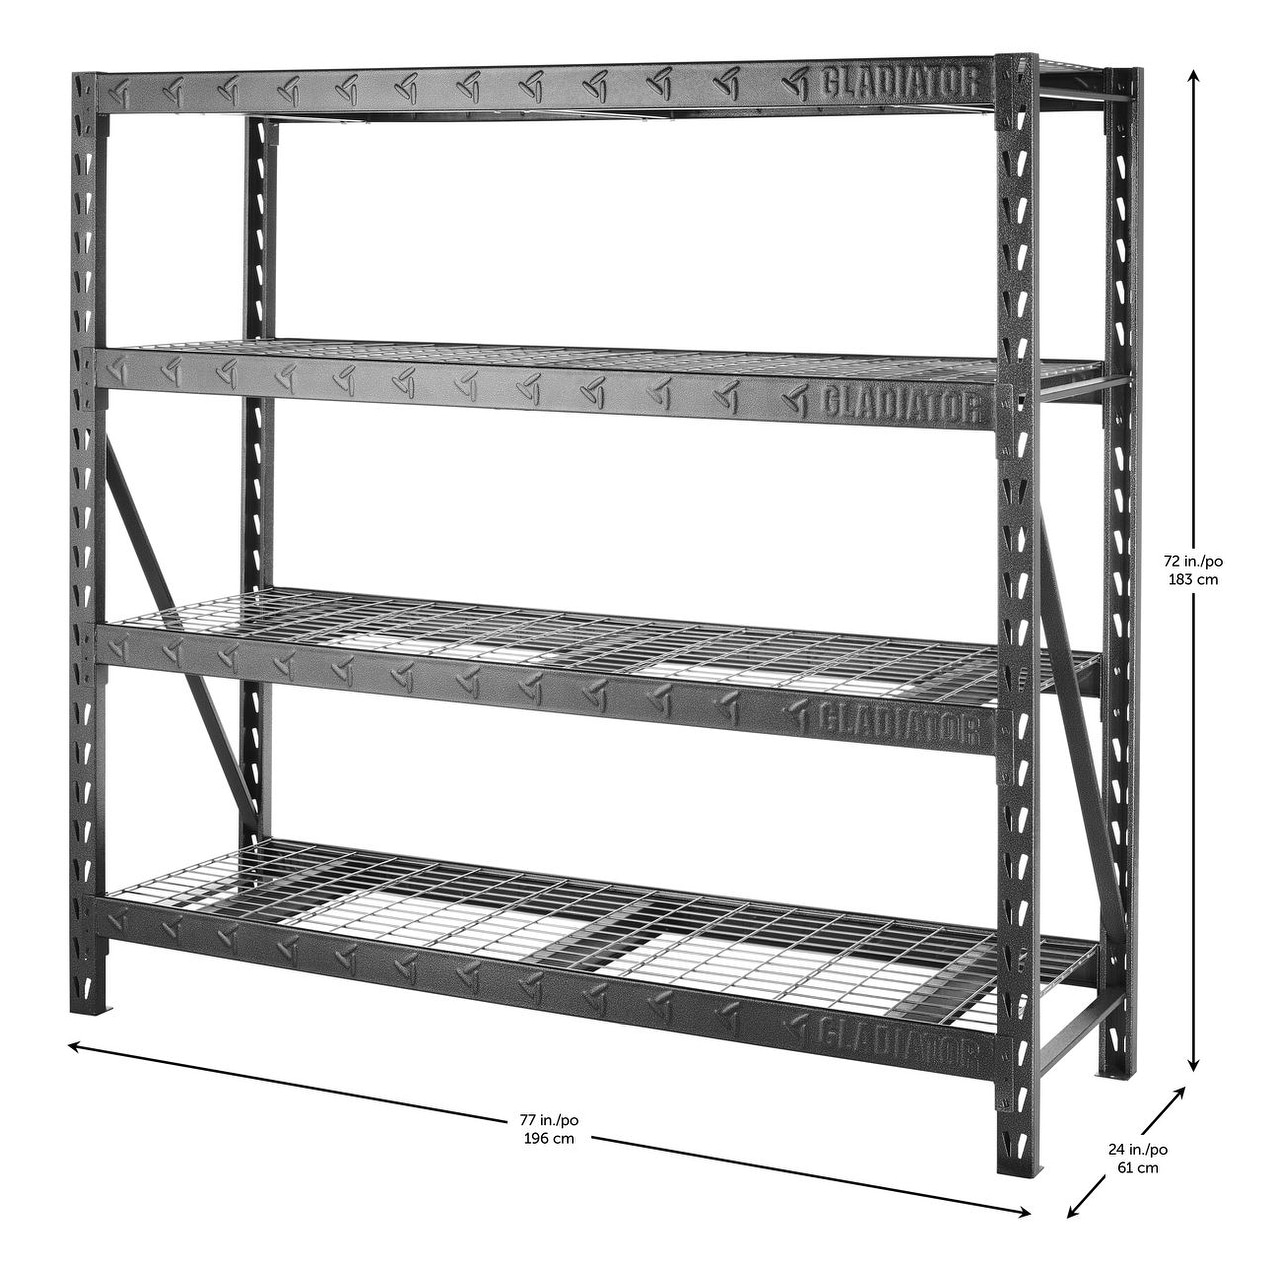 https://ak1.ostkcdn.com/images/products/is/images/direct/3dd269ccc7c56608ac636fd2ae848ce3e63b57dd/77%22-Wide-Heavy-Duty-Rack-with-Four-24%22-Deep-Shelves.jpg